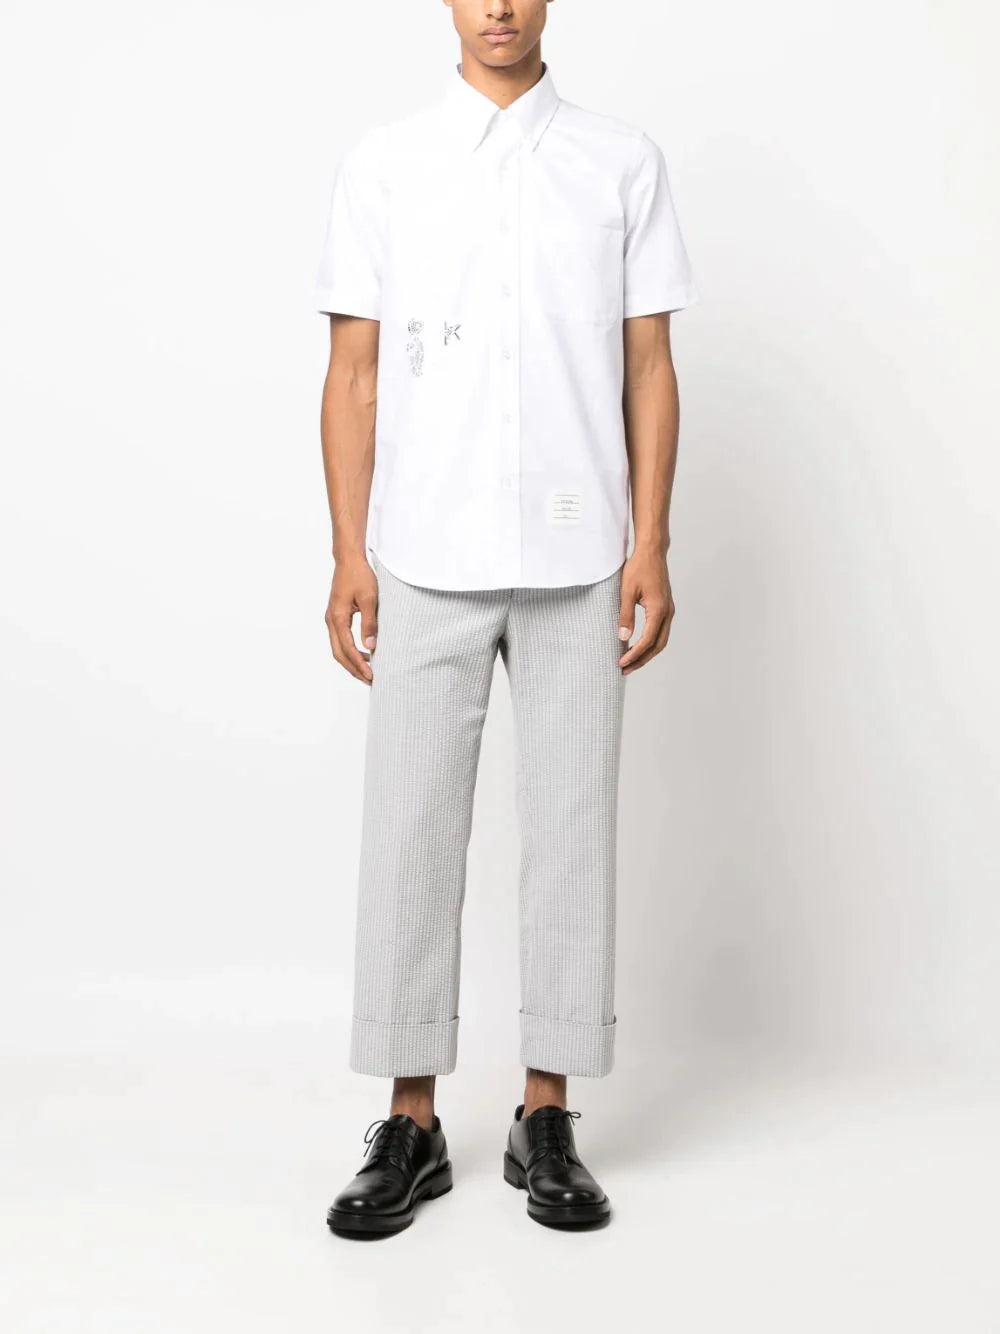 Straight Fit Button Down Shirts - 2